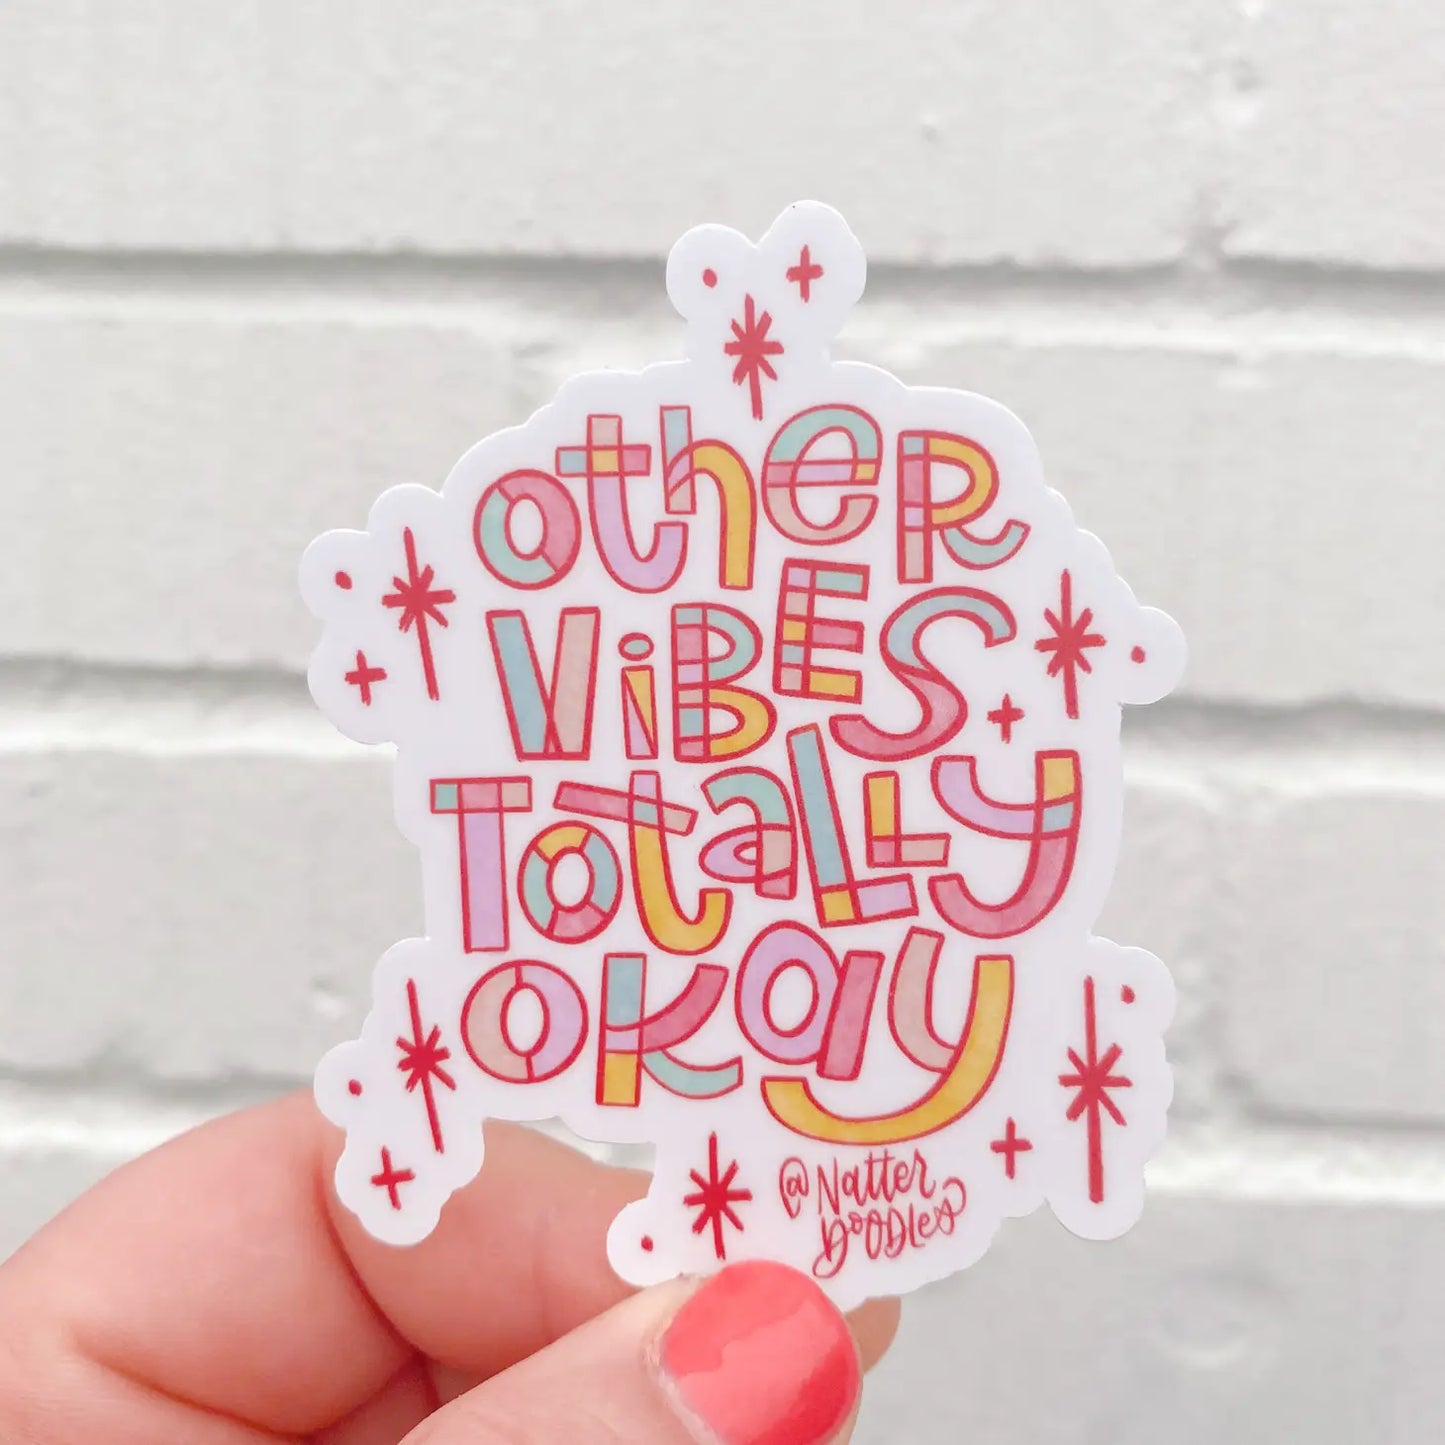 Load image into Gallery viewer, Other Vibes Totally Okay Sticker
